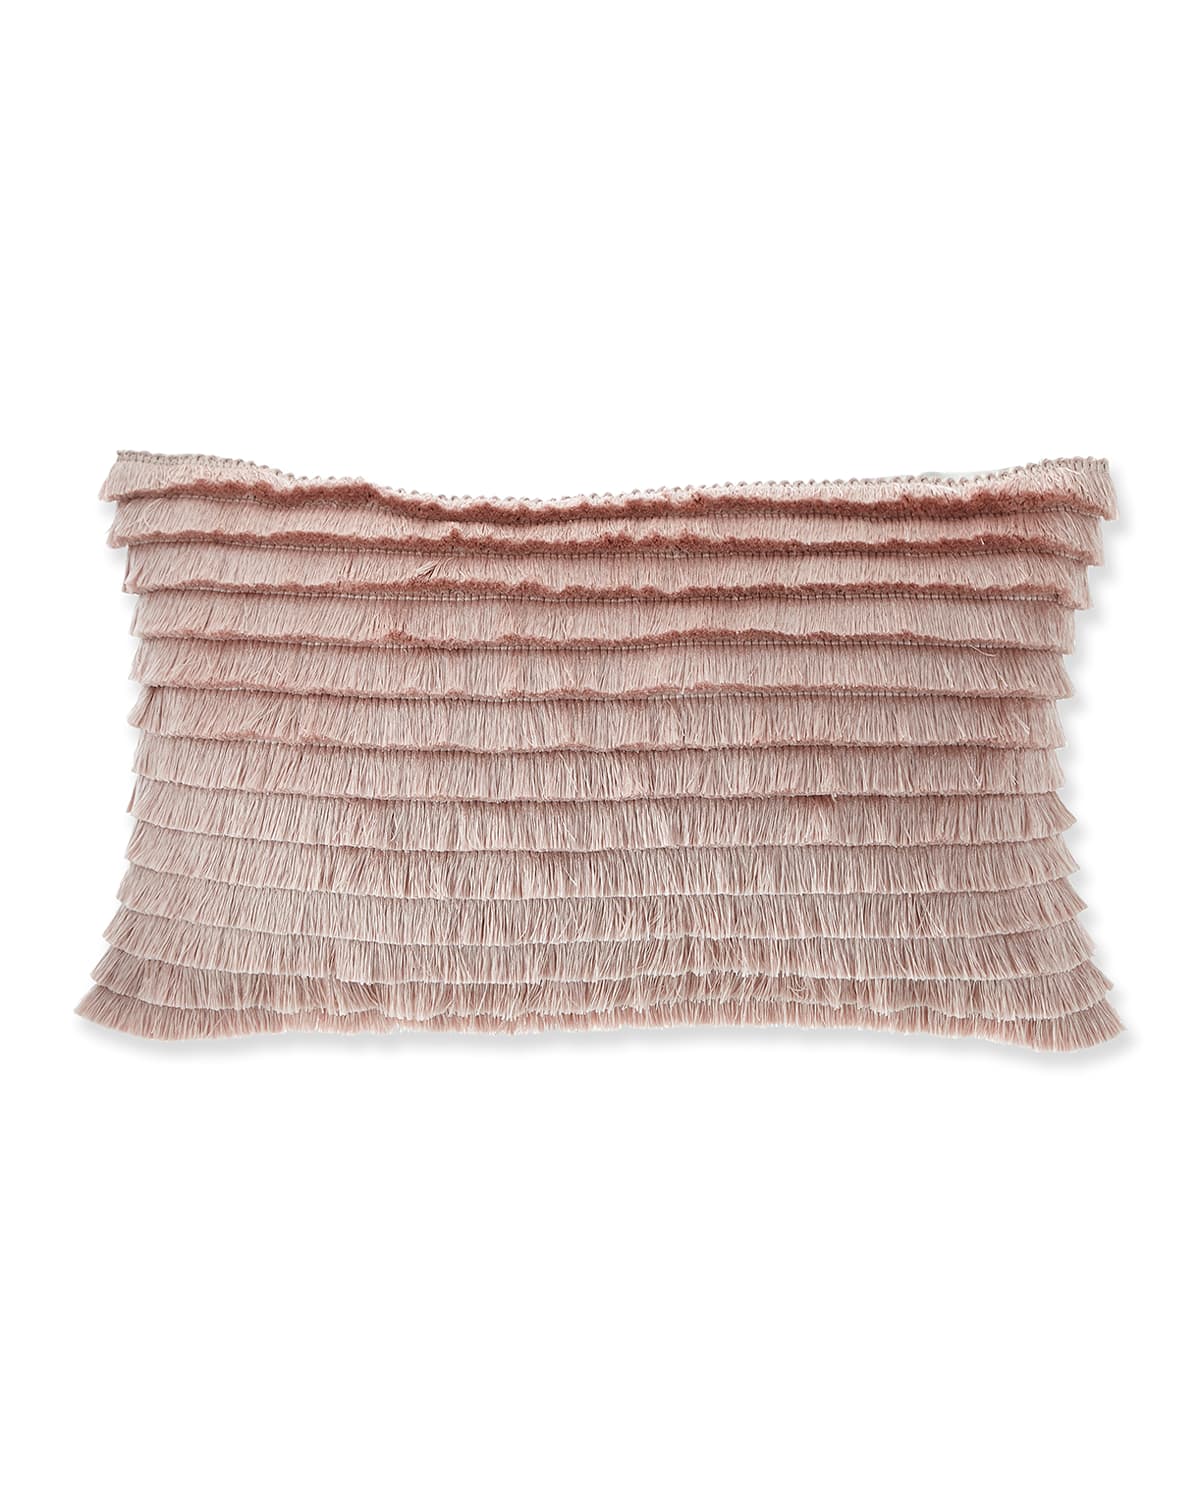 Shop Eastern Accents Mack Heather Pillow With Brush Fringe